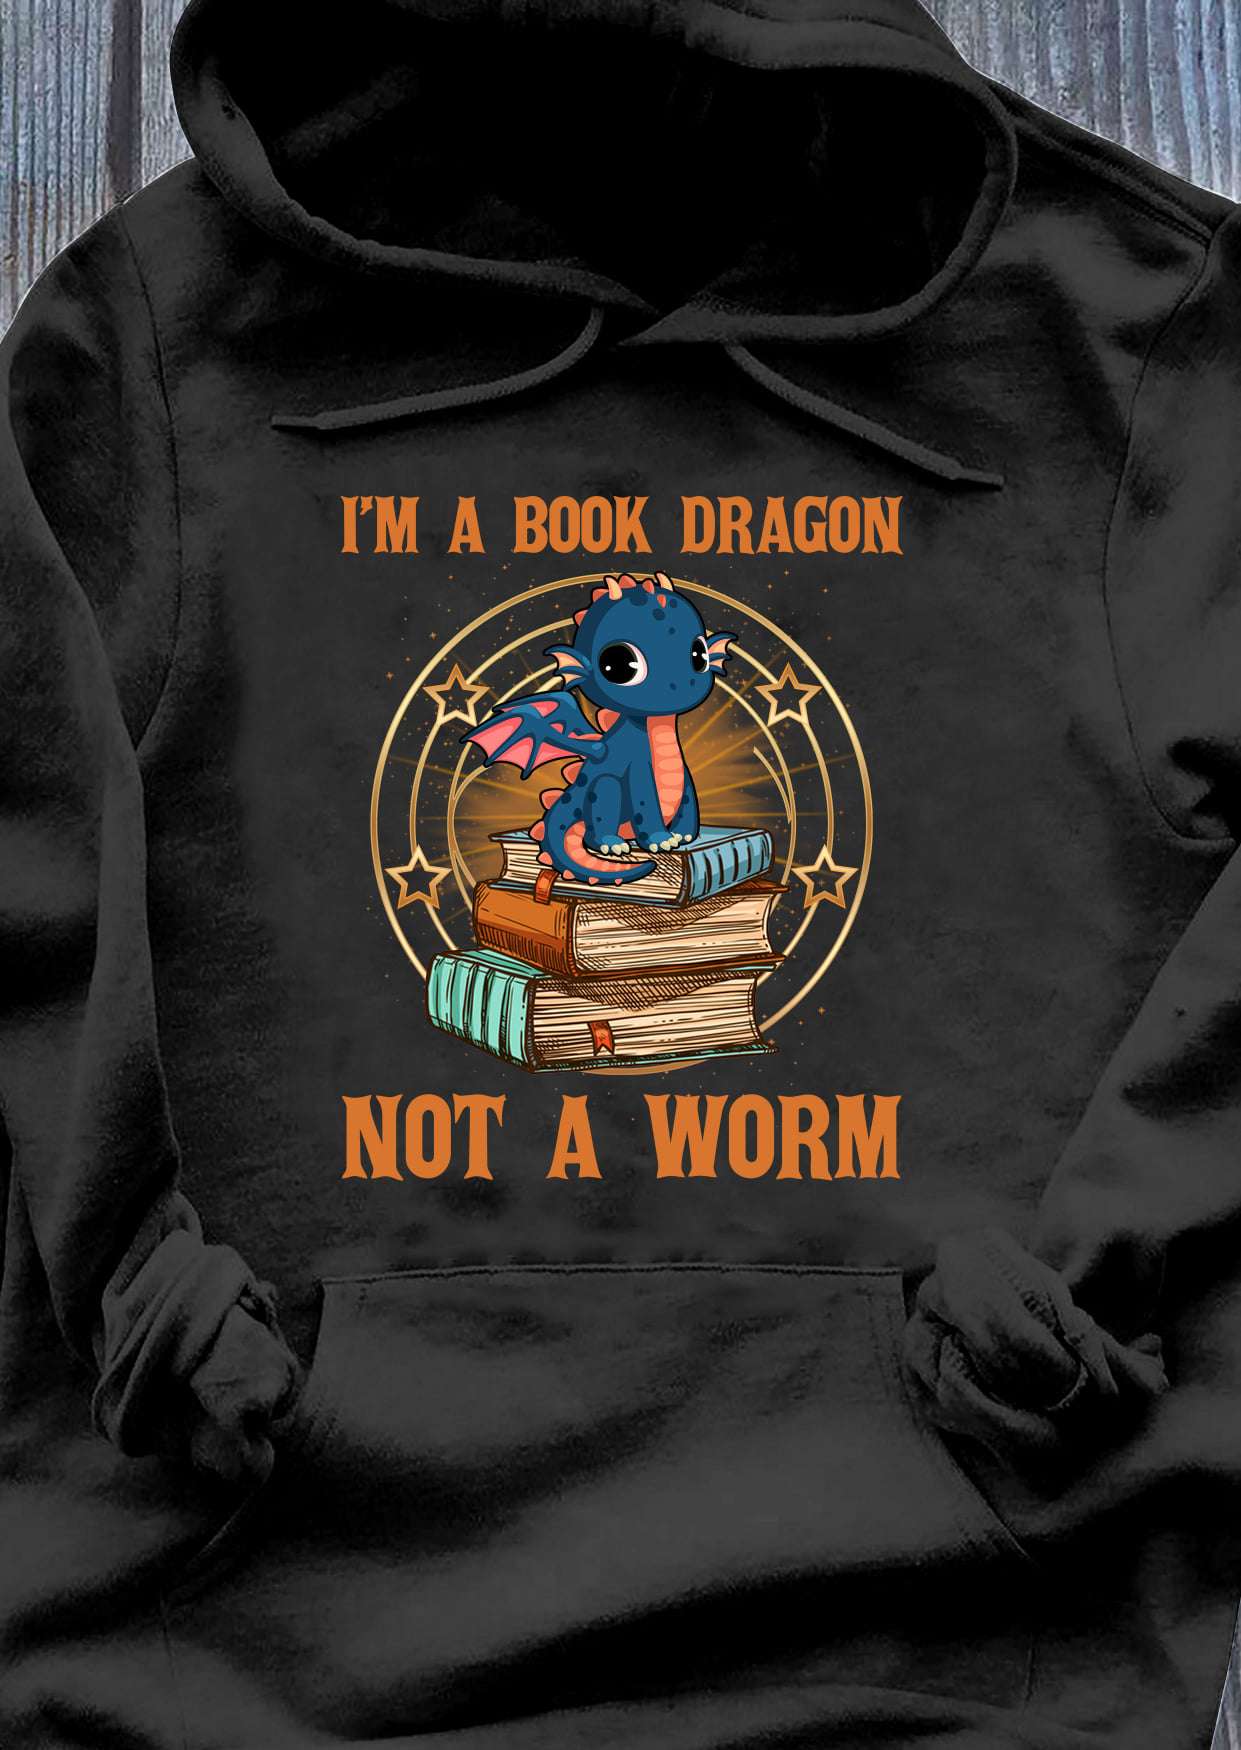 I'm a book dragon not a worm - Gift for bookaholic, Dragon and books